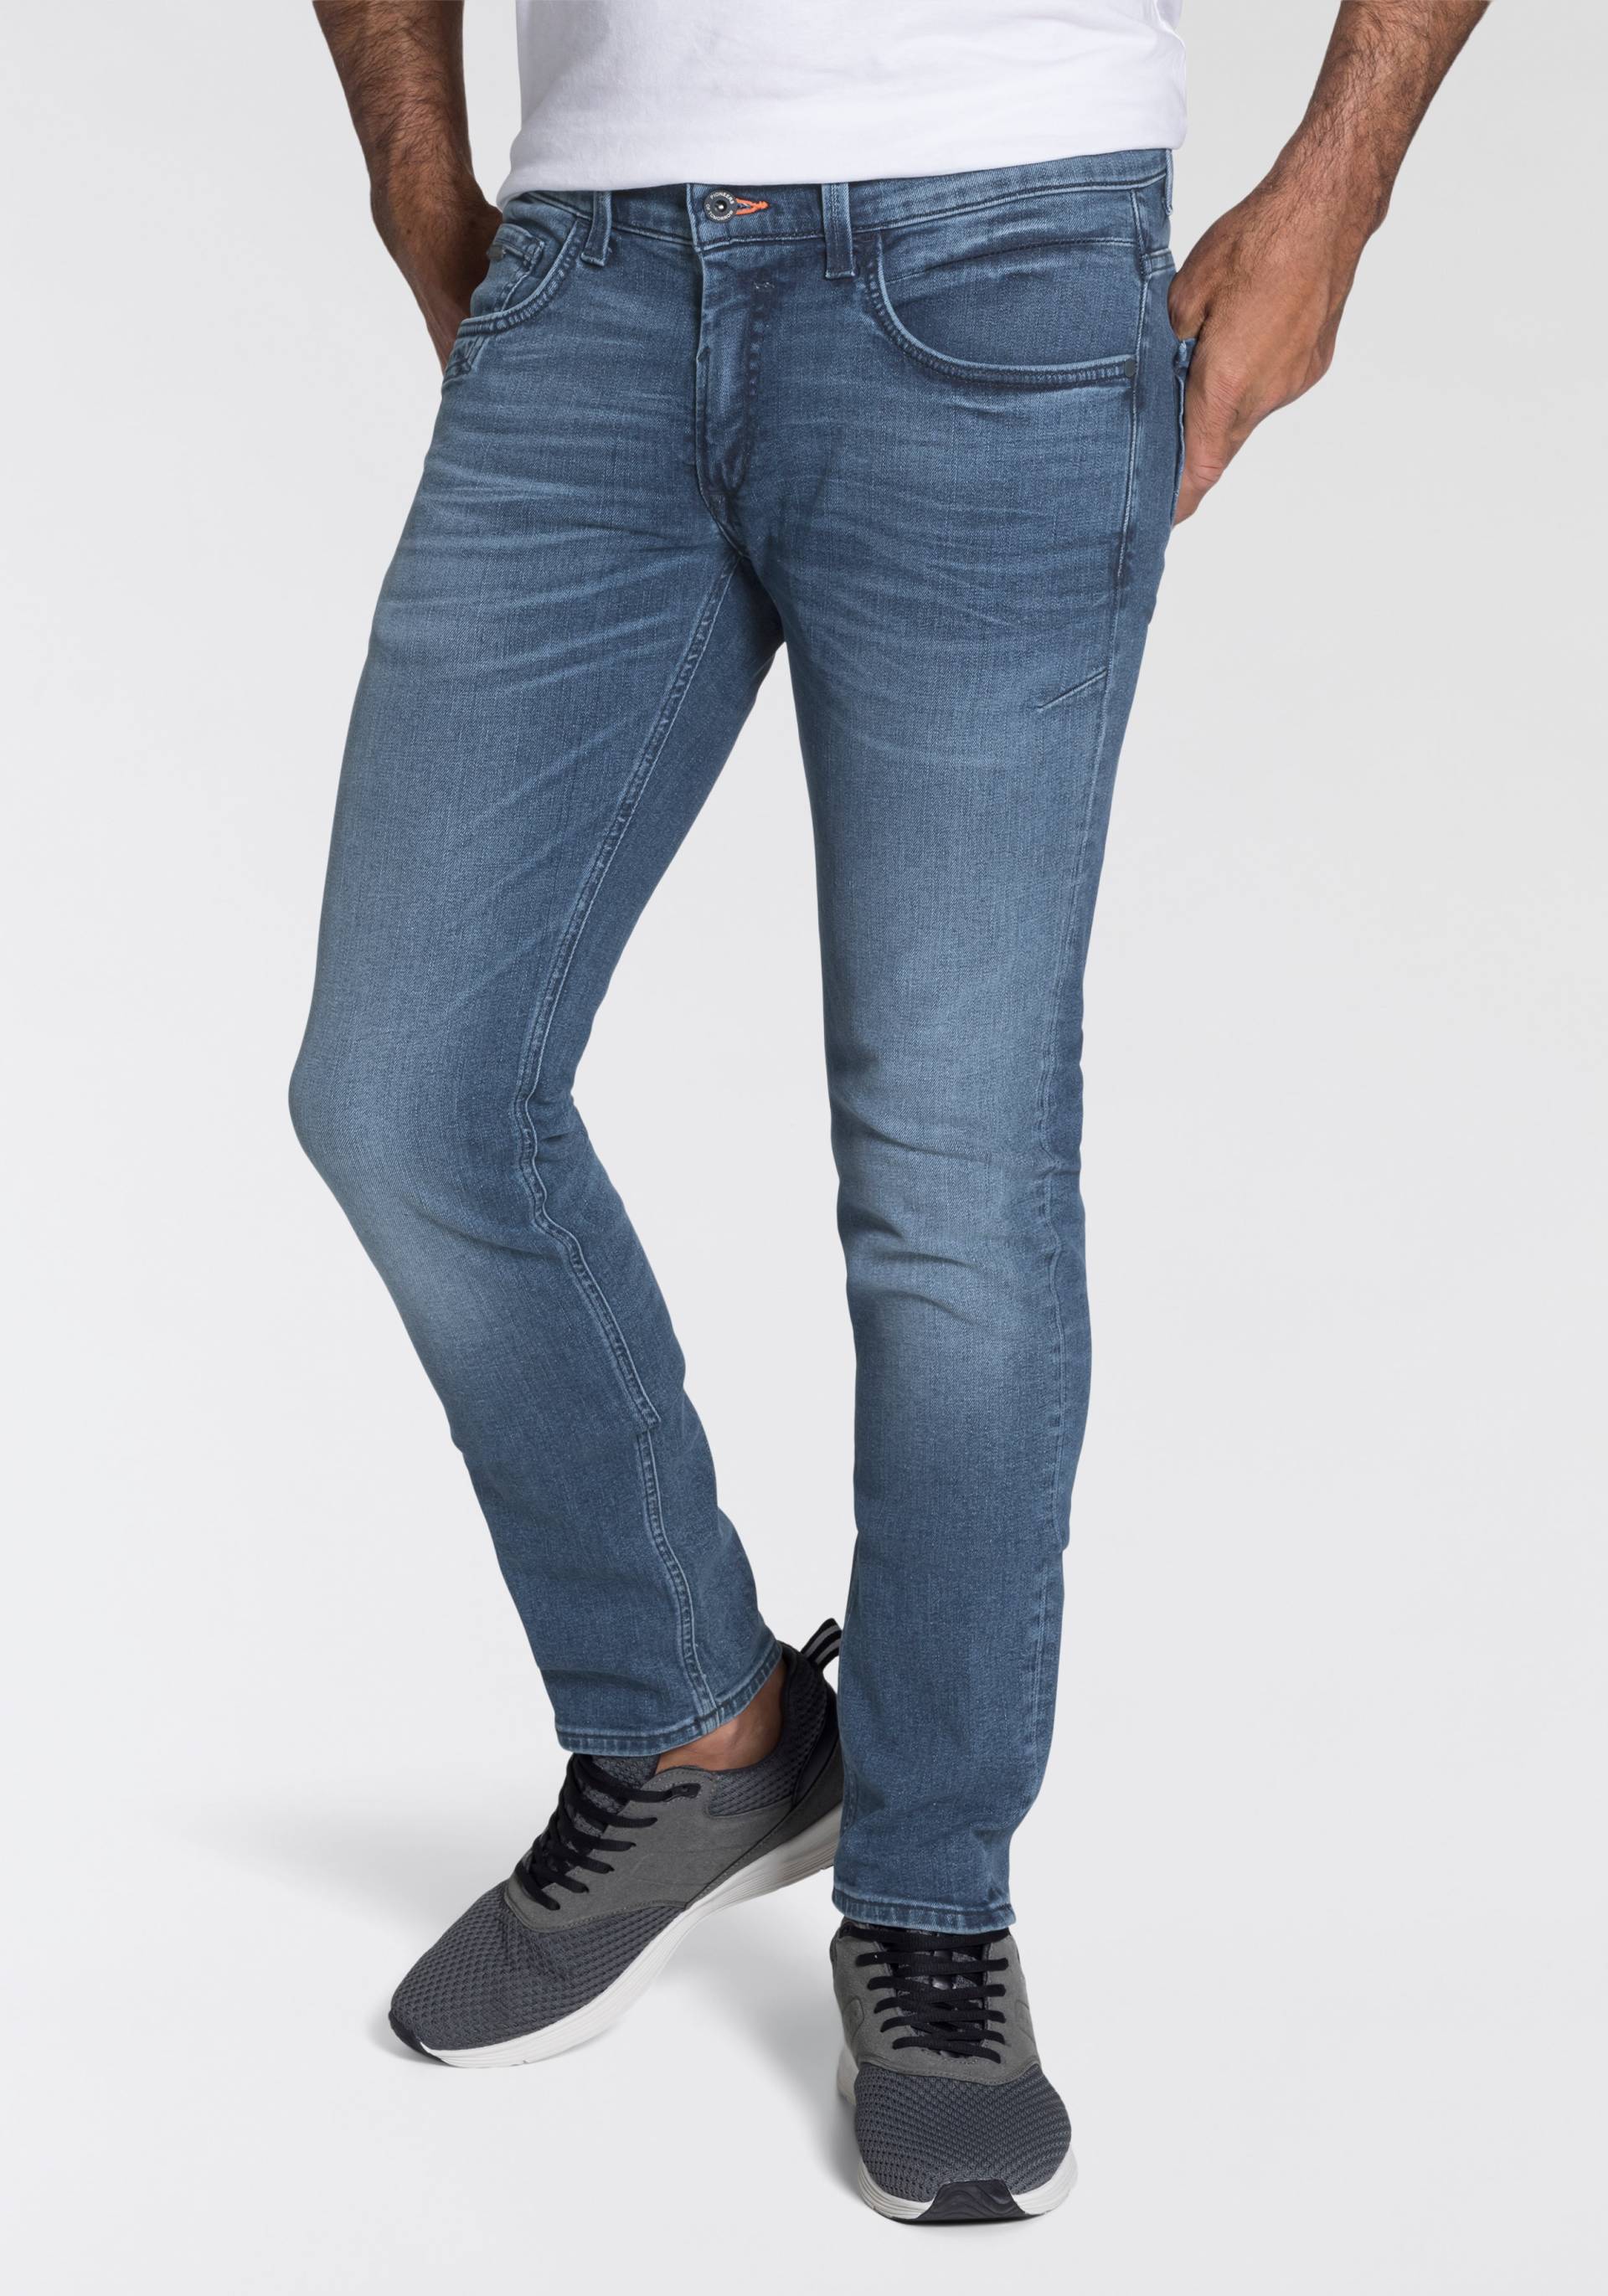 Pioneer Authentic Jeans Slim-fit-Jeans »Ethan« von Pioneer Authentic Jeans